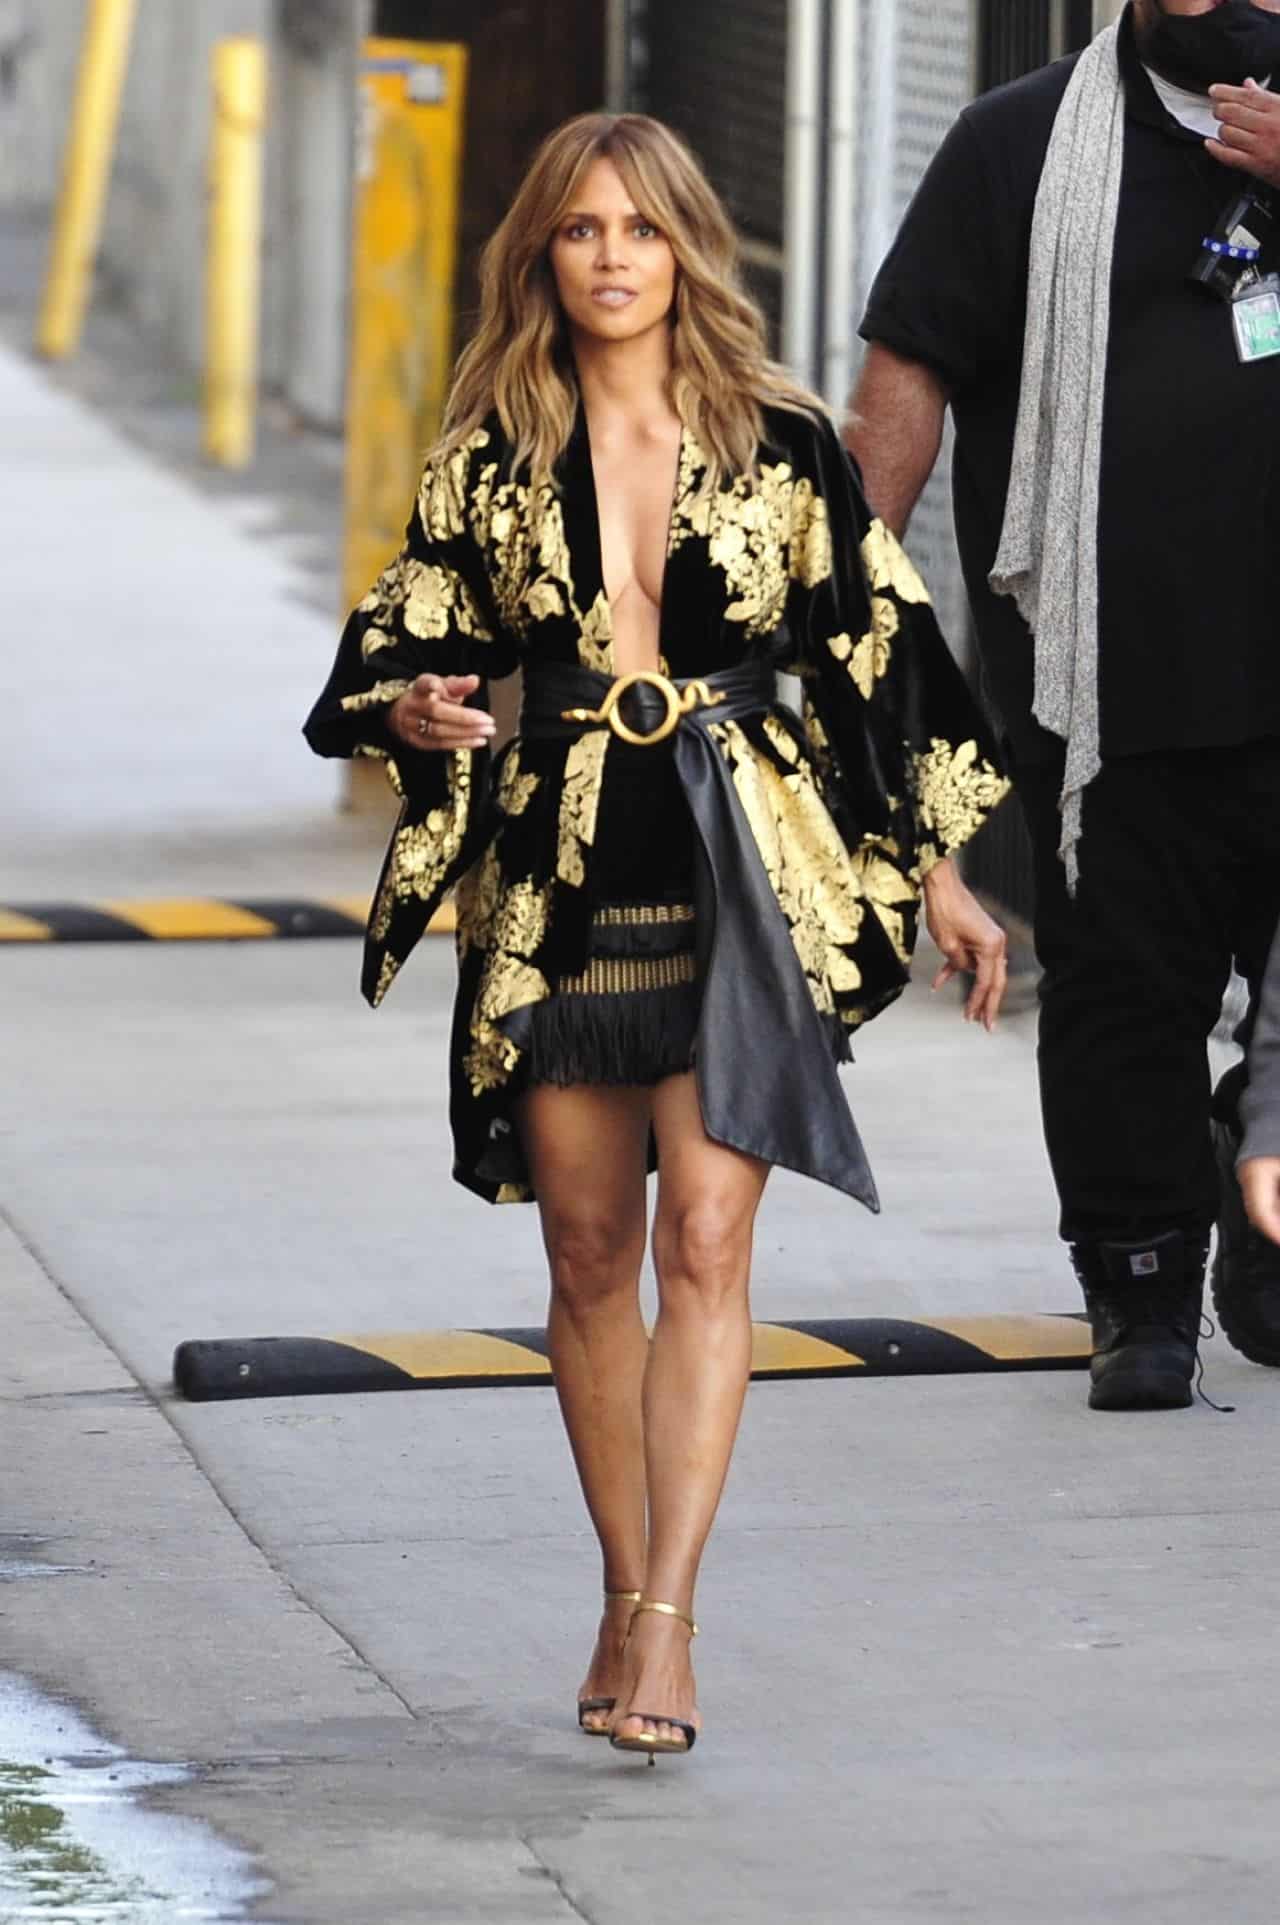 Halle Berry Looks Incredible in Caftan Mini Dress at Jimmy Kimmel Live